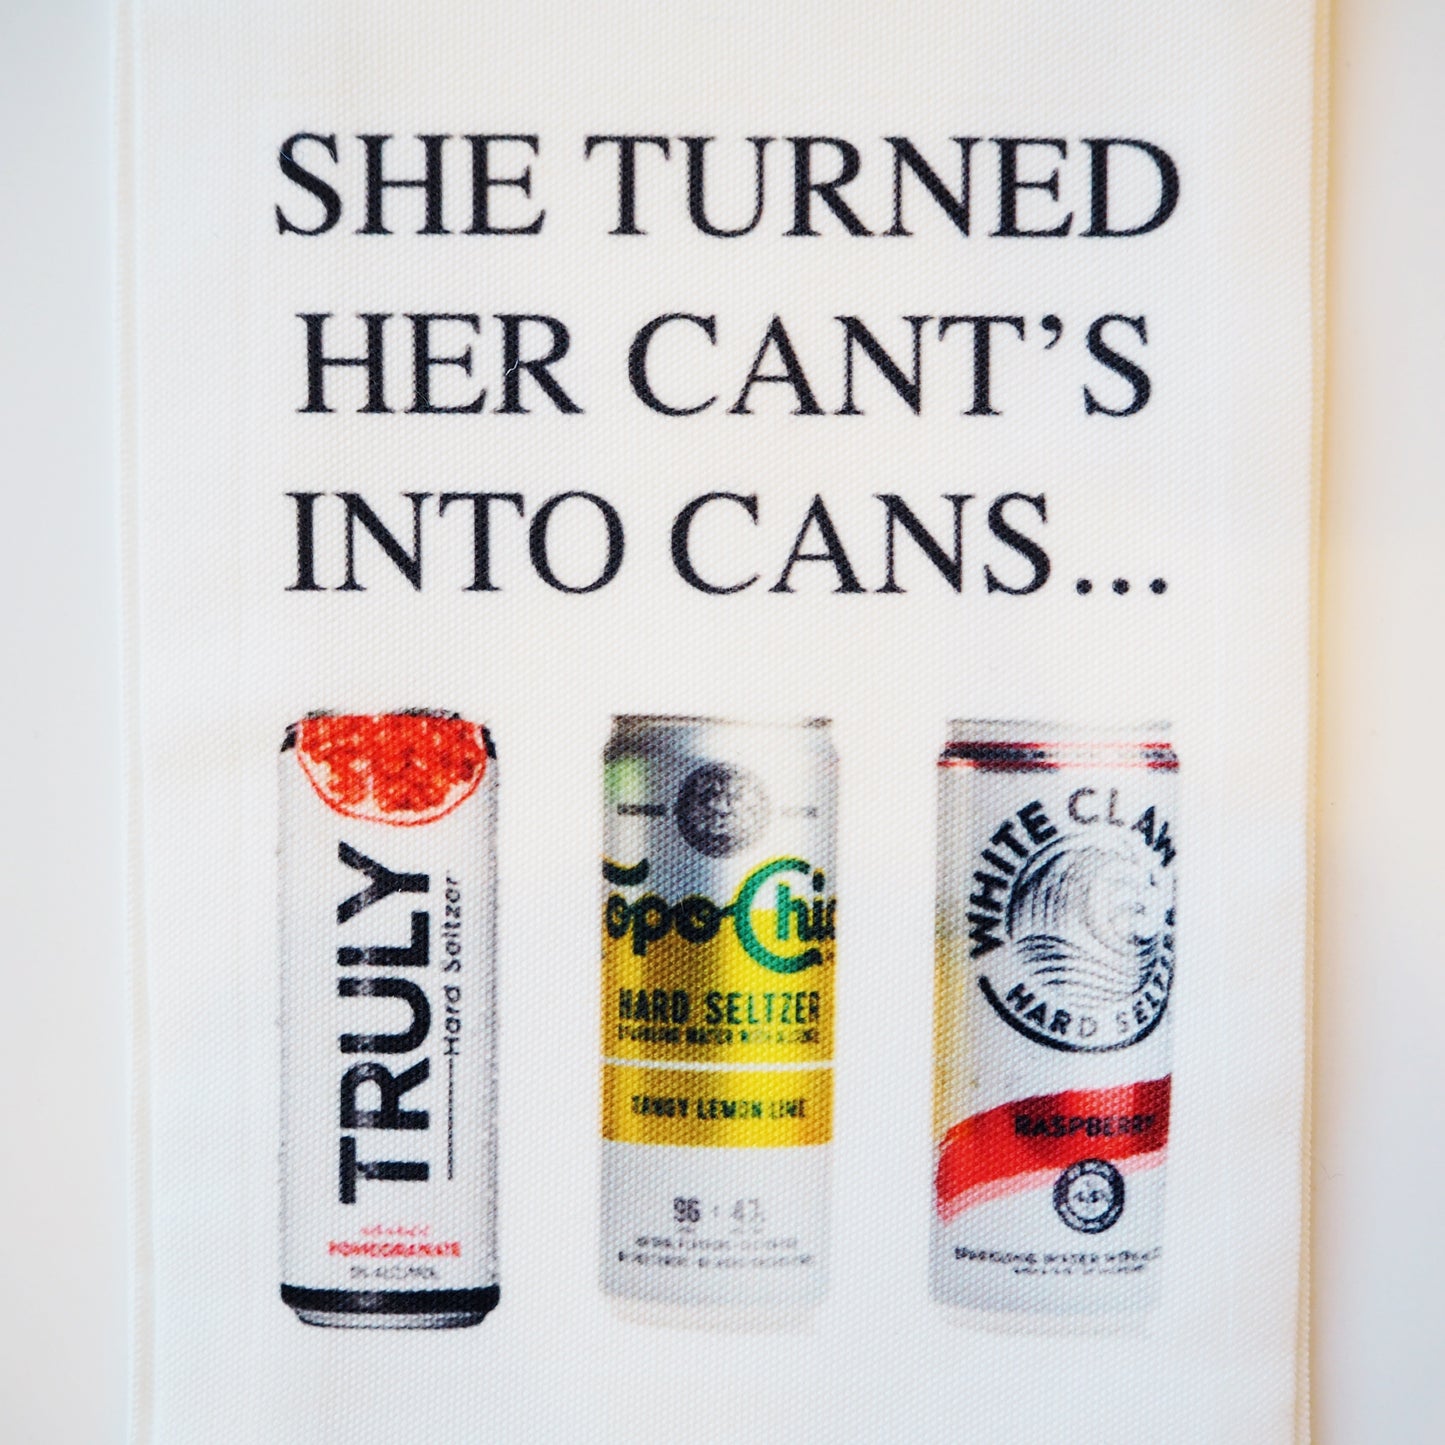 "She Turned Her Cant's into Cans" Kitchen Towel